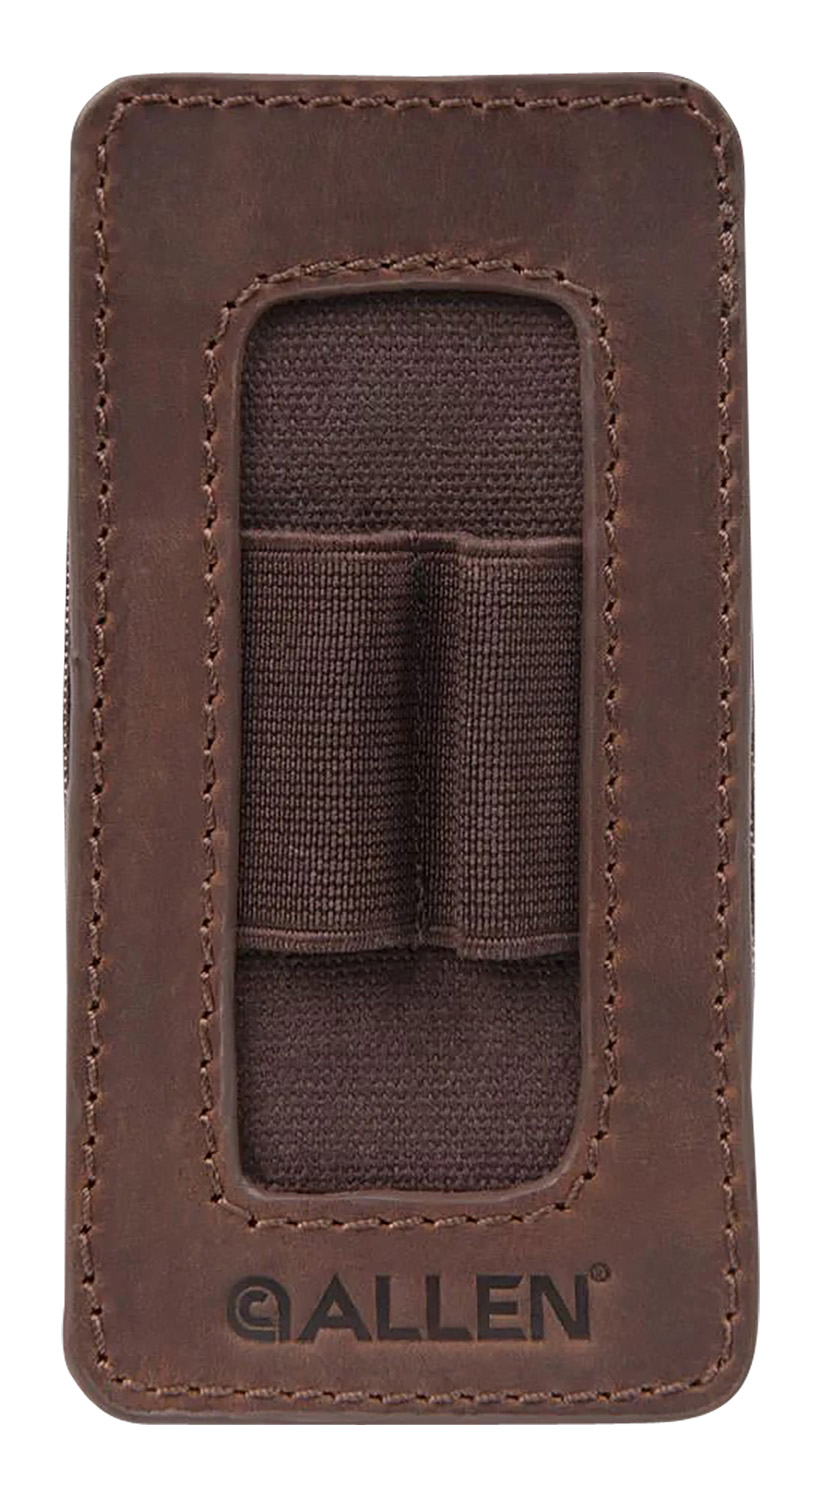 Allen 8515 Castle Rock Forend Ammo Carrier Brown Leather .223 Rem/300 Win Mag Capacity 2rd Rifle Forend Mount